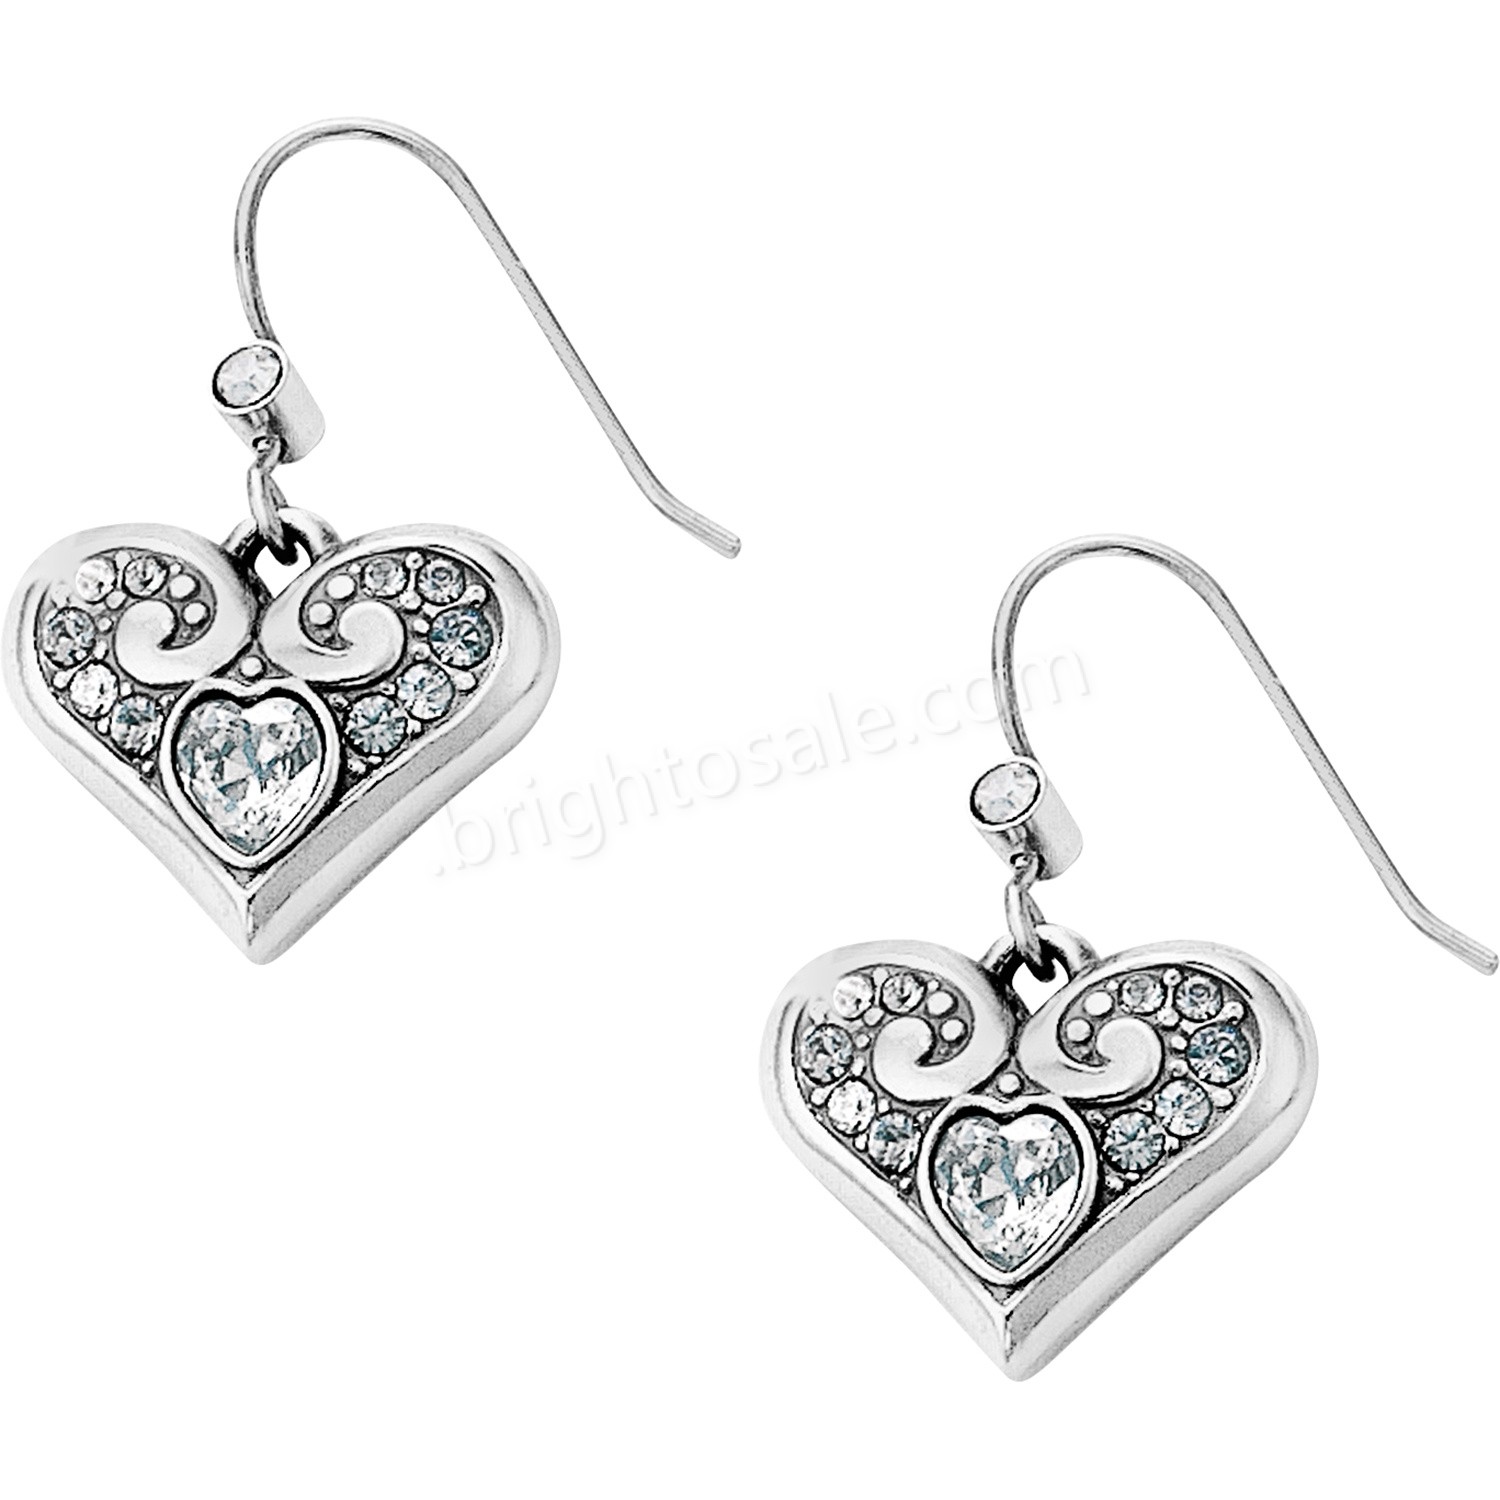 Brighton Collectibles & Online Discount Cristalina Heart French Wire Earrings - Brighton Collectibles & Online Discount Cristalina Heart French Wire Earrings